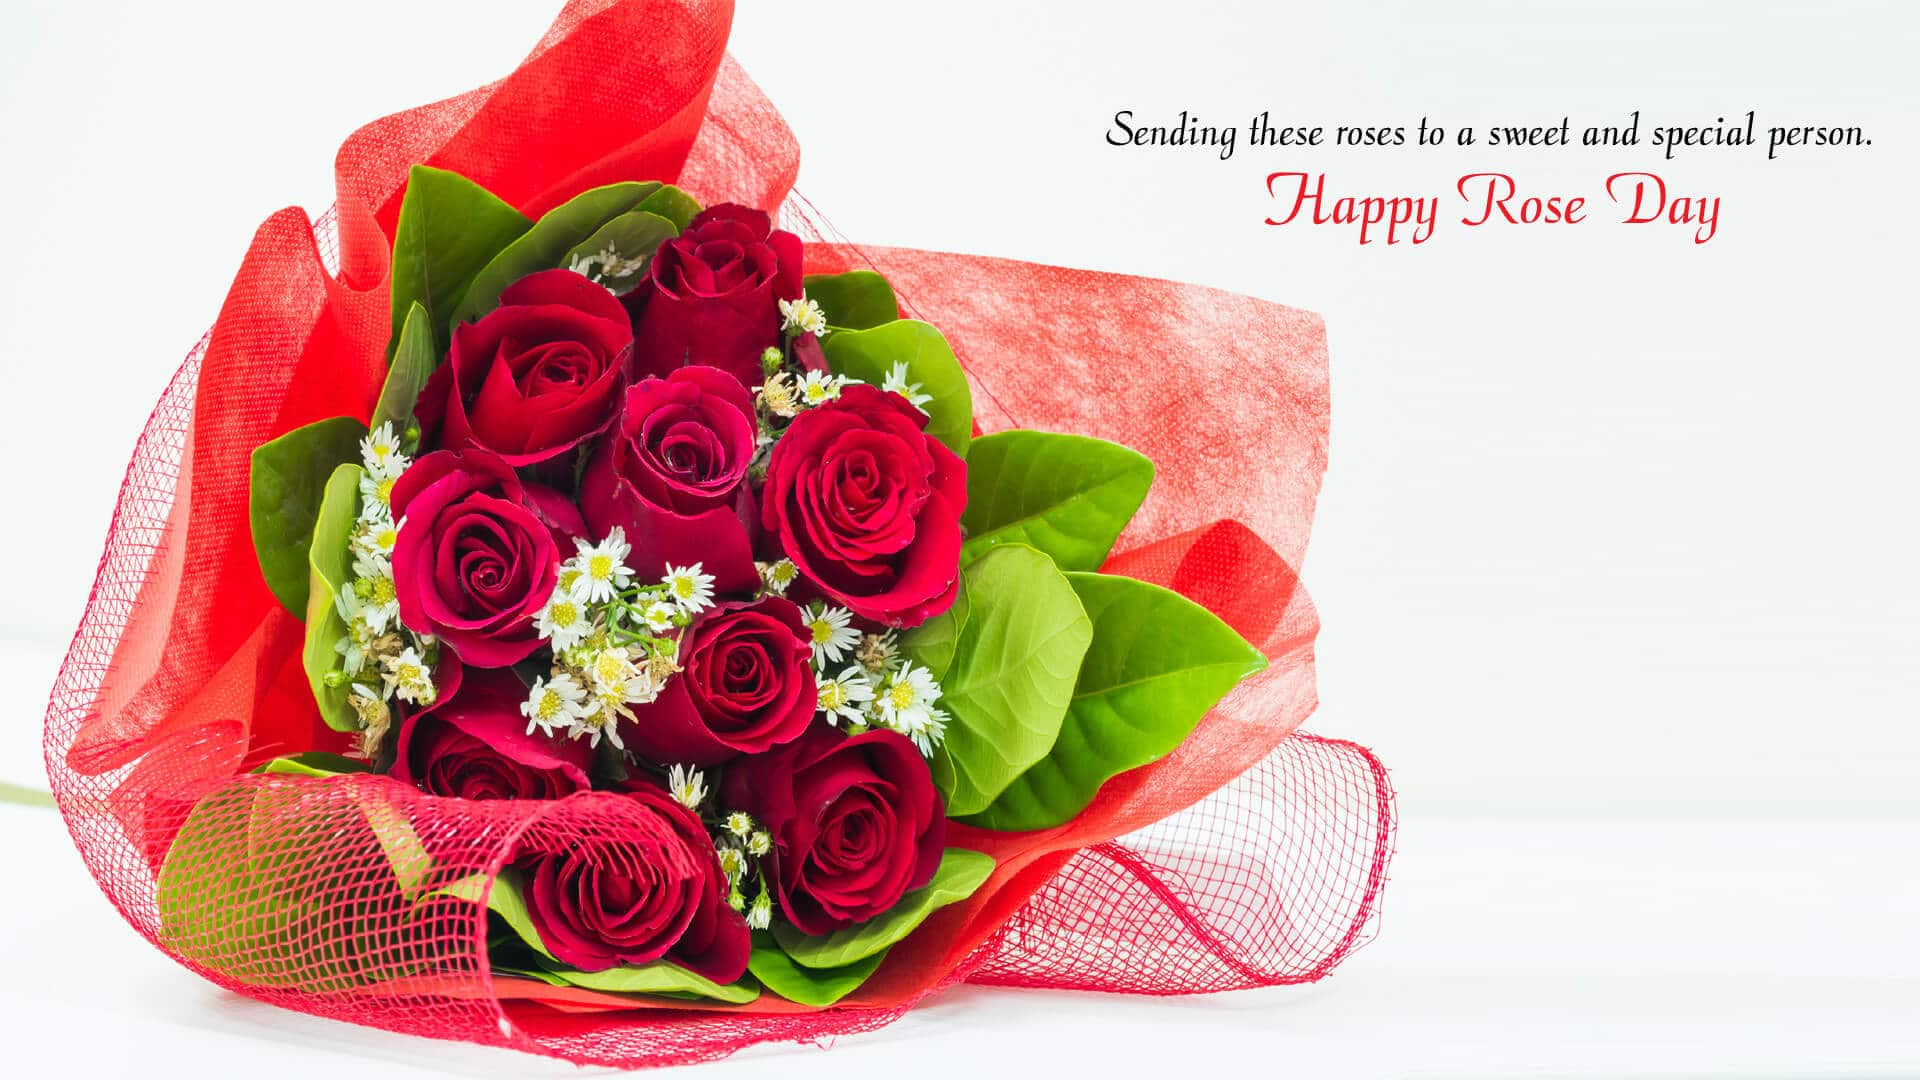 Happy Rose Day 2019 Image, Picture, Wallpaper In HD Free Download Now